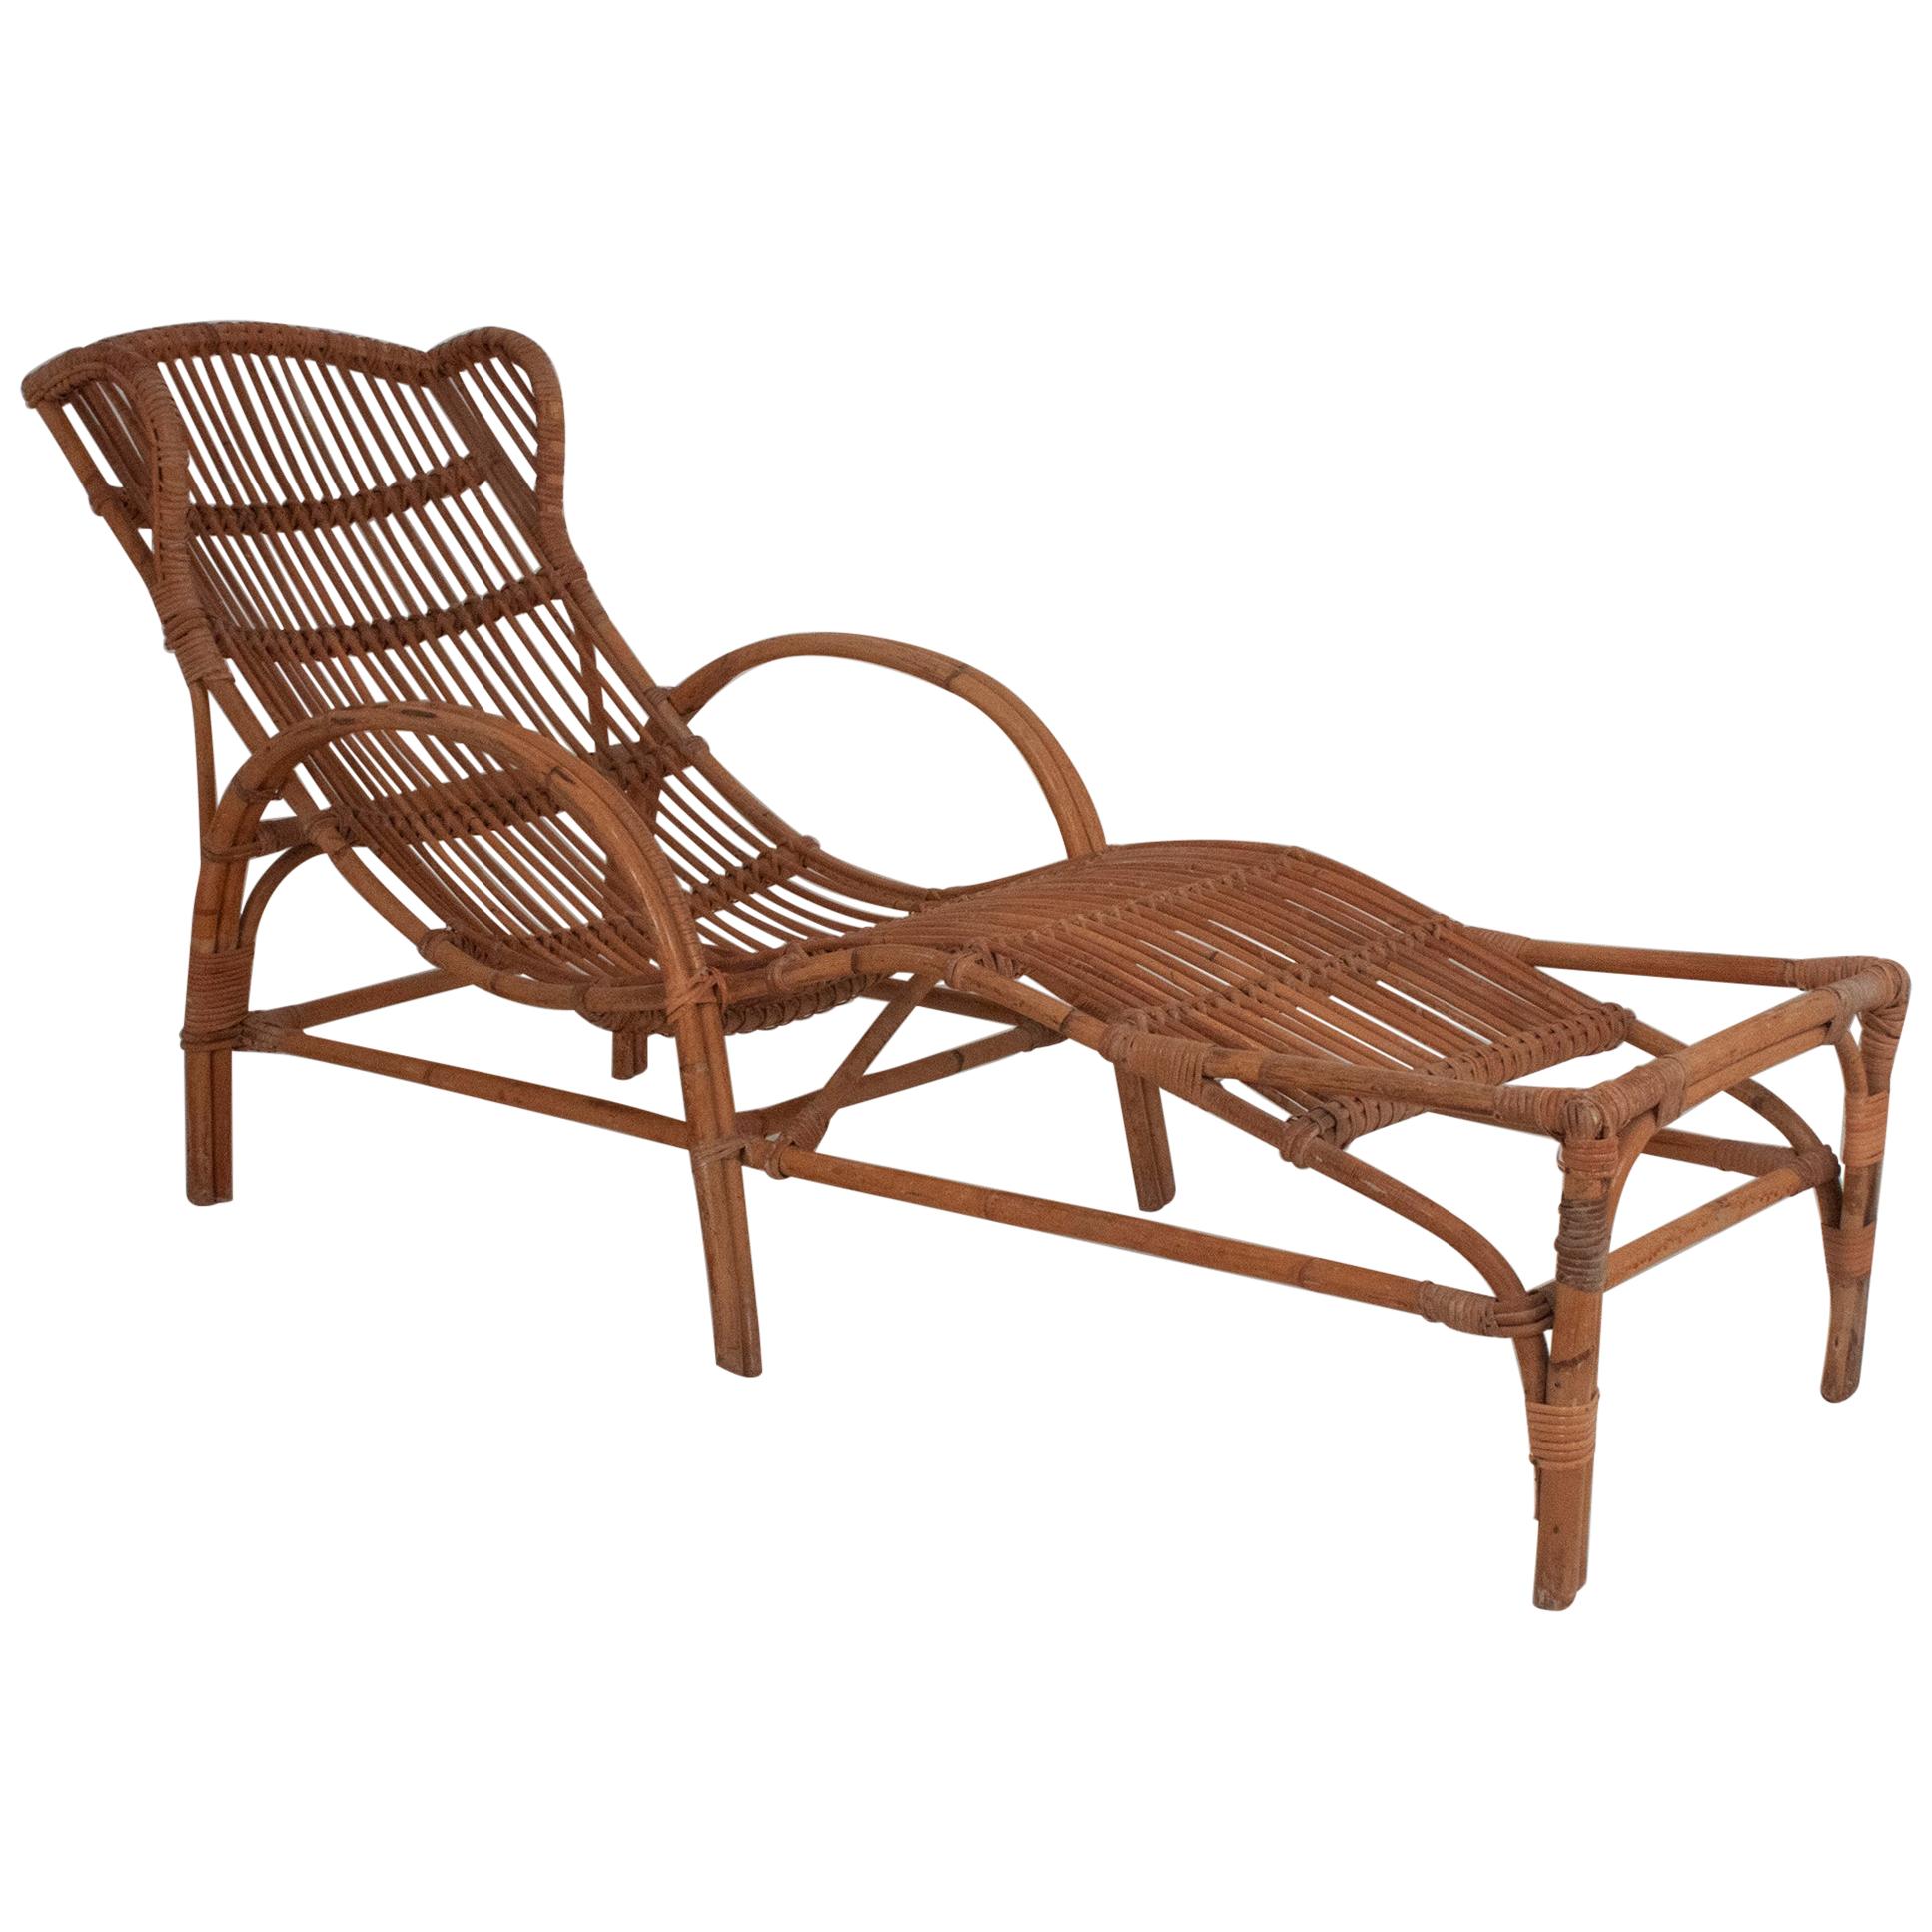 Bamboo and Rattan Chaise Lounge Midcentury, Spain